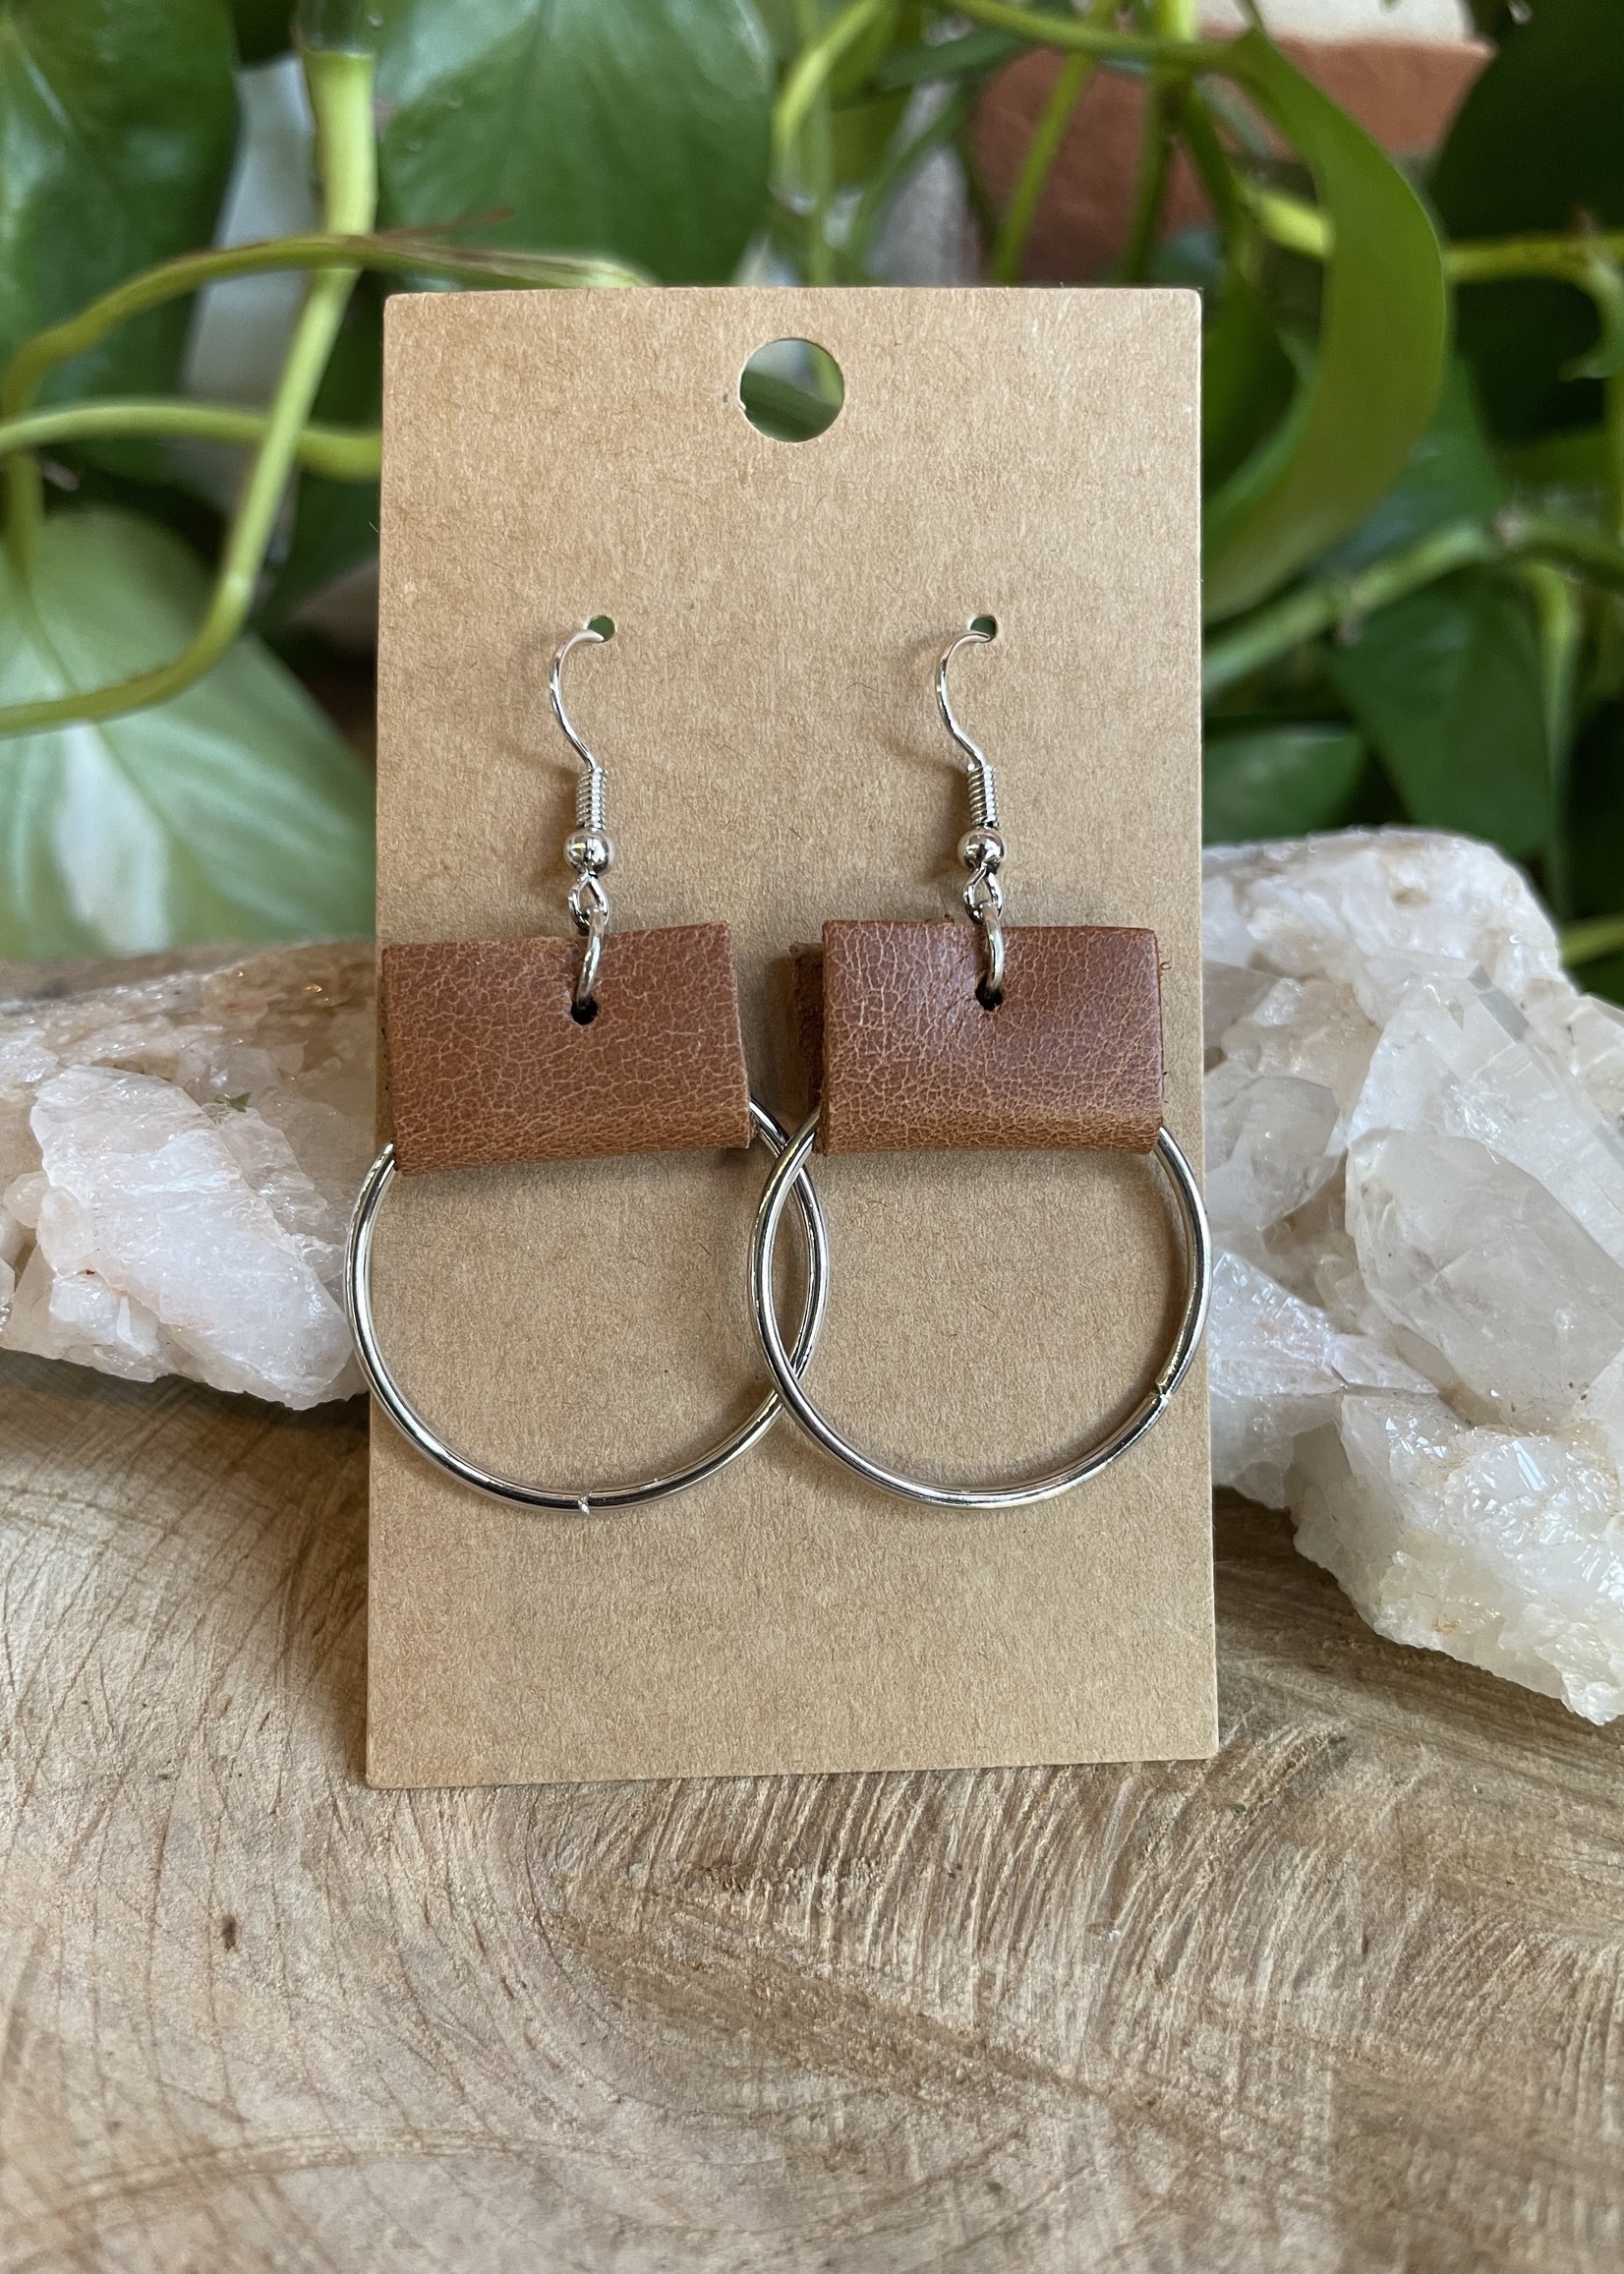 Leather/Circle earrings by Melissa Sue